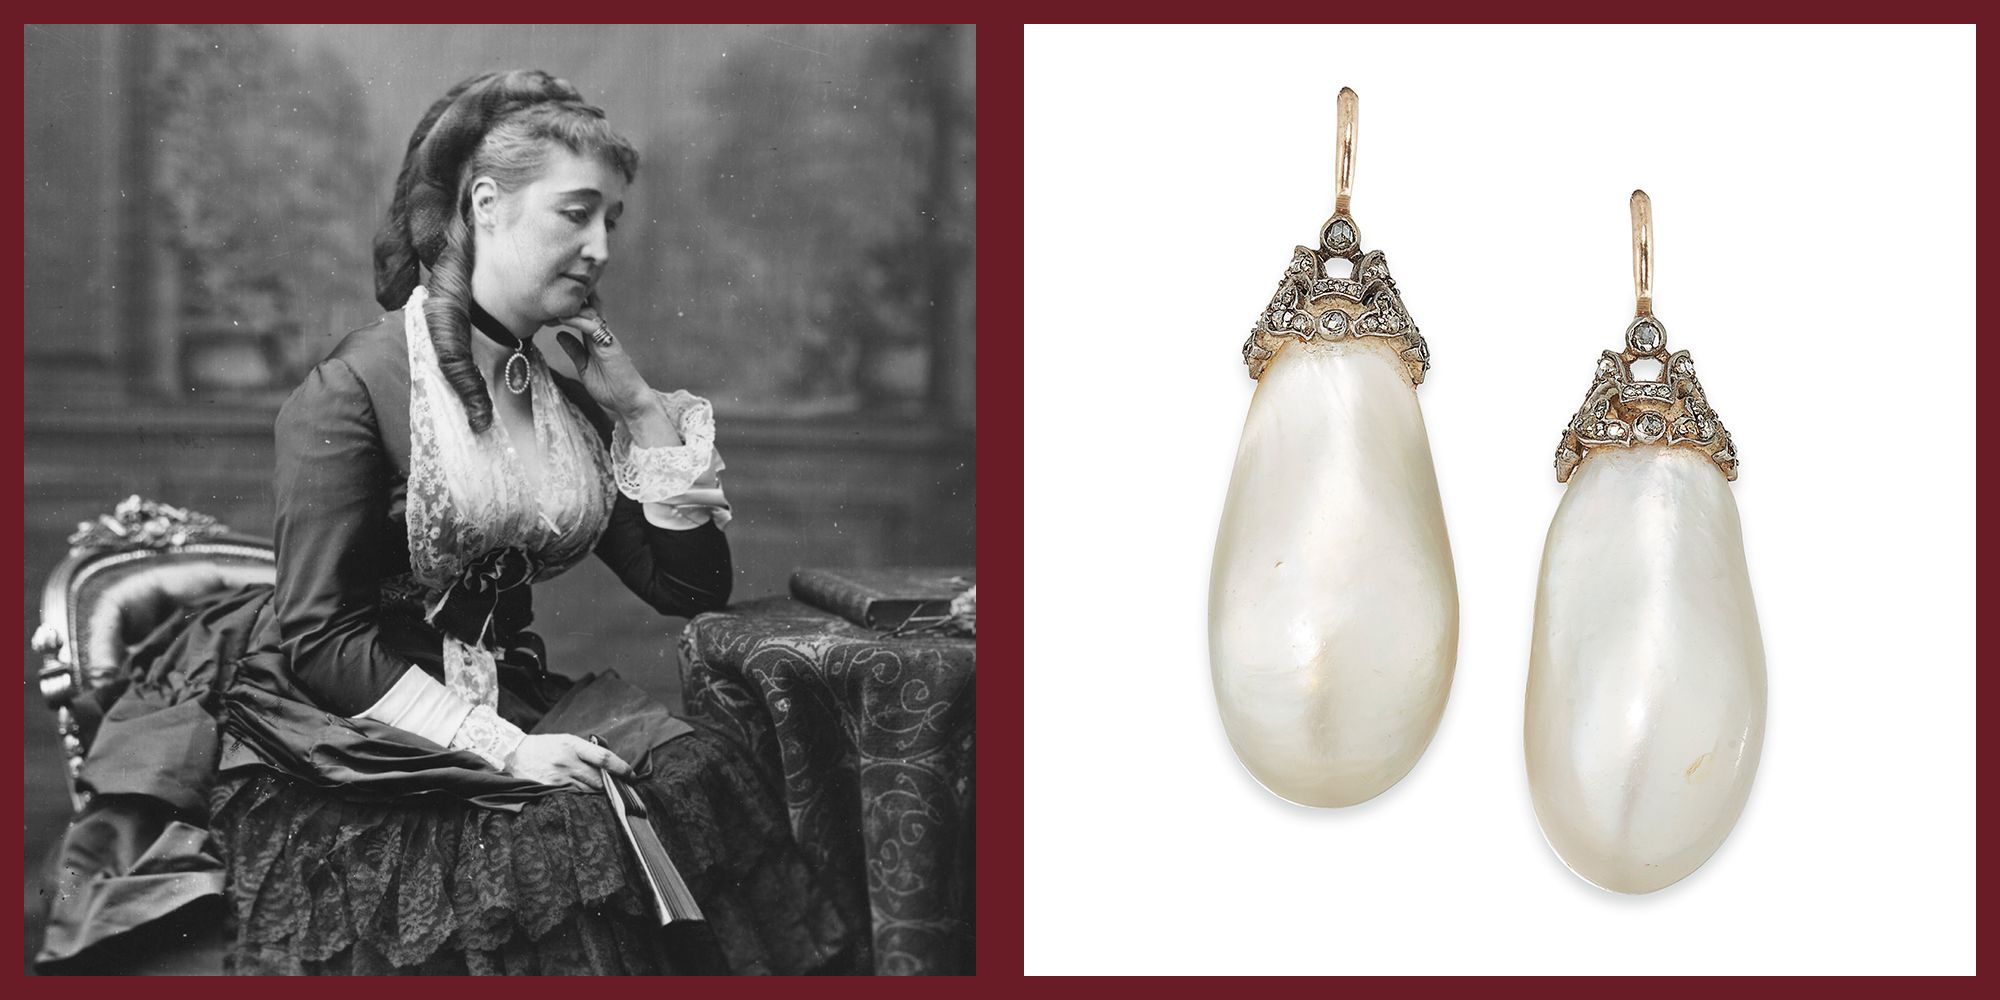 Jewels from France's Last Empress Heading to Auction